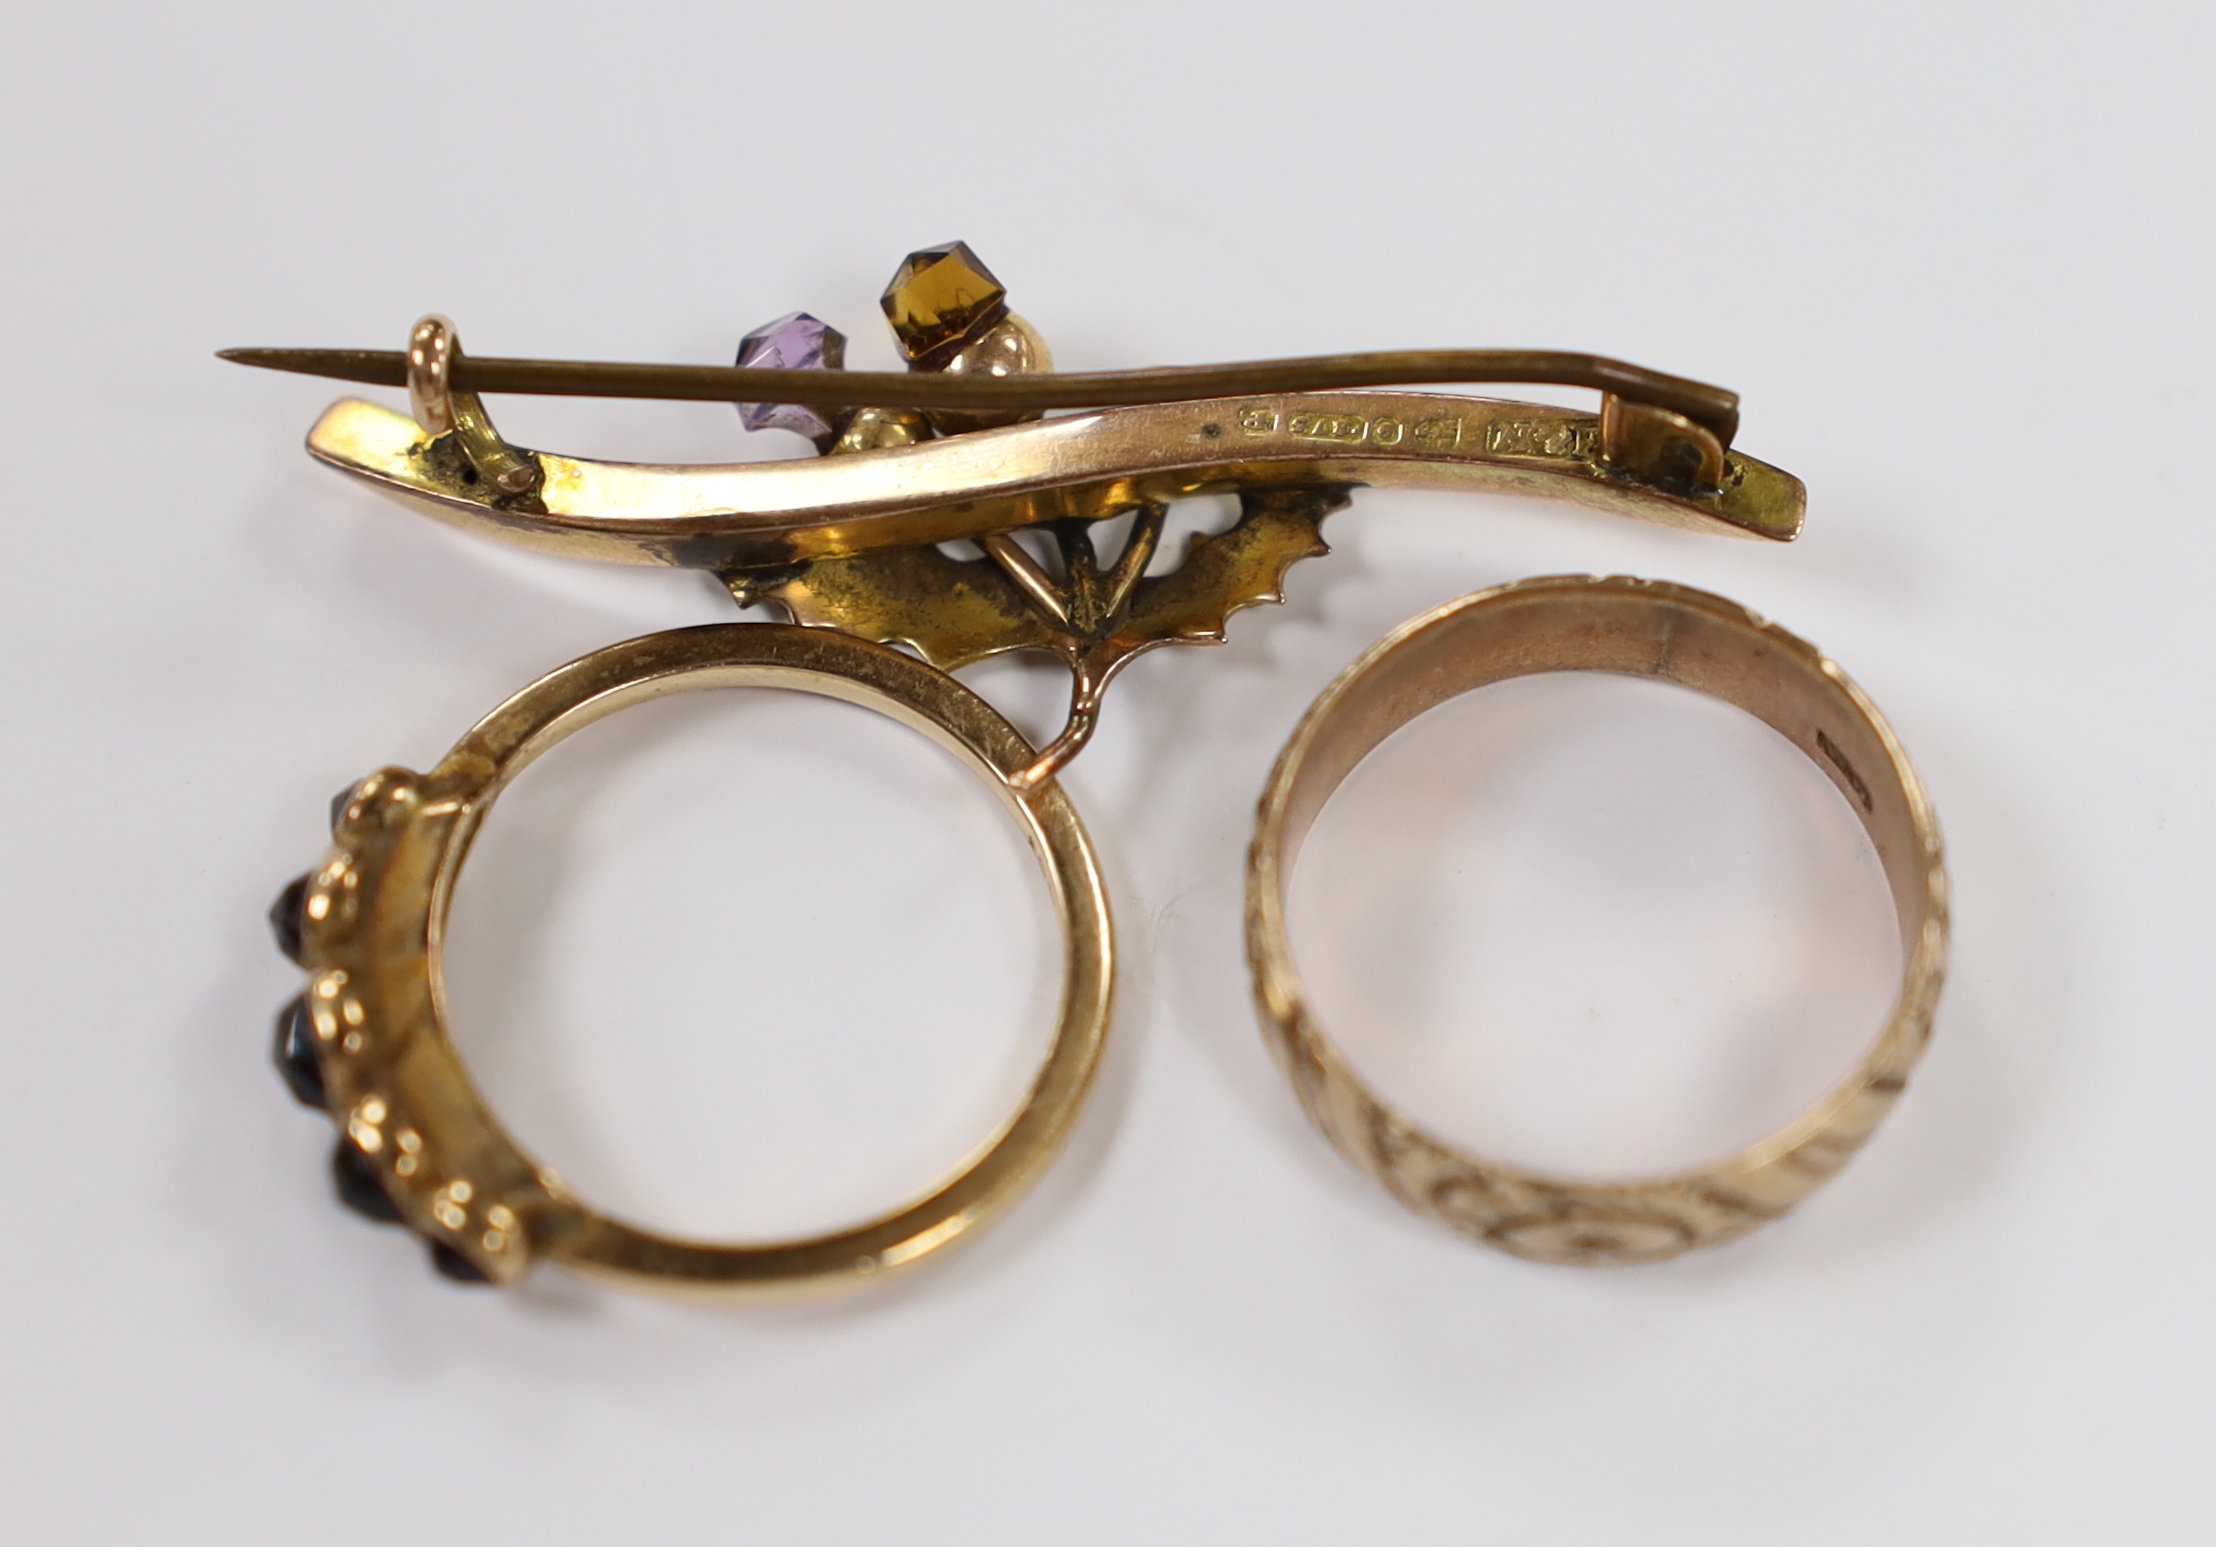 A 9ct and graduated five stone facetted garnet set ring, an engraved 9ct gold band and a 9ct gold and gem set bar brooch (stone missing), gross weight 8.5 grams.